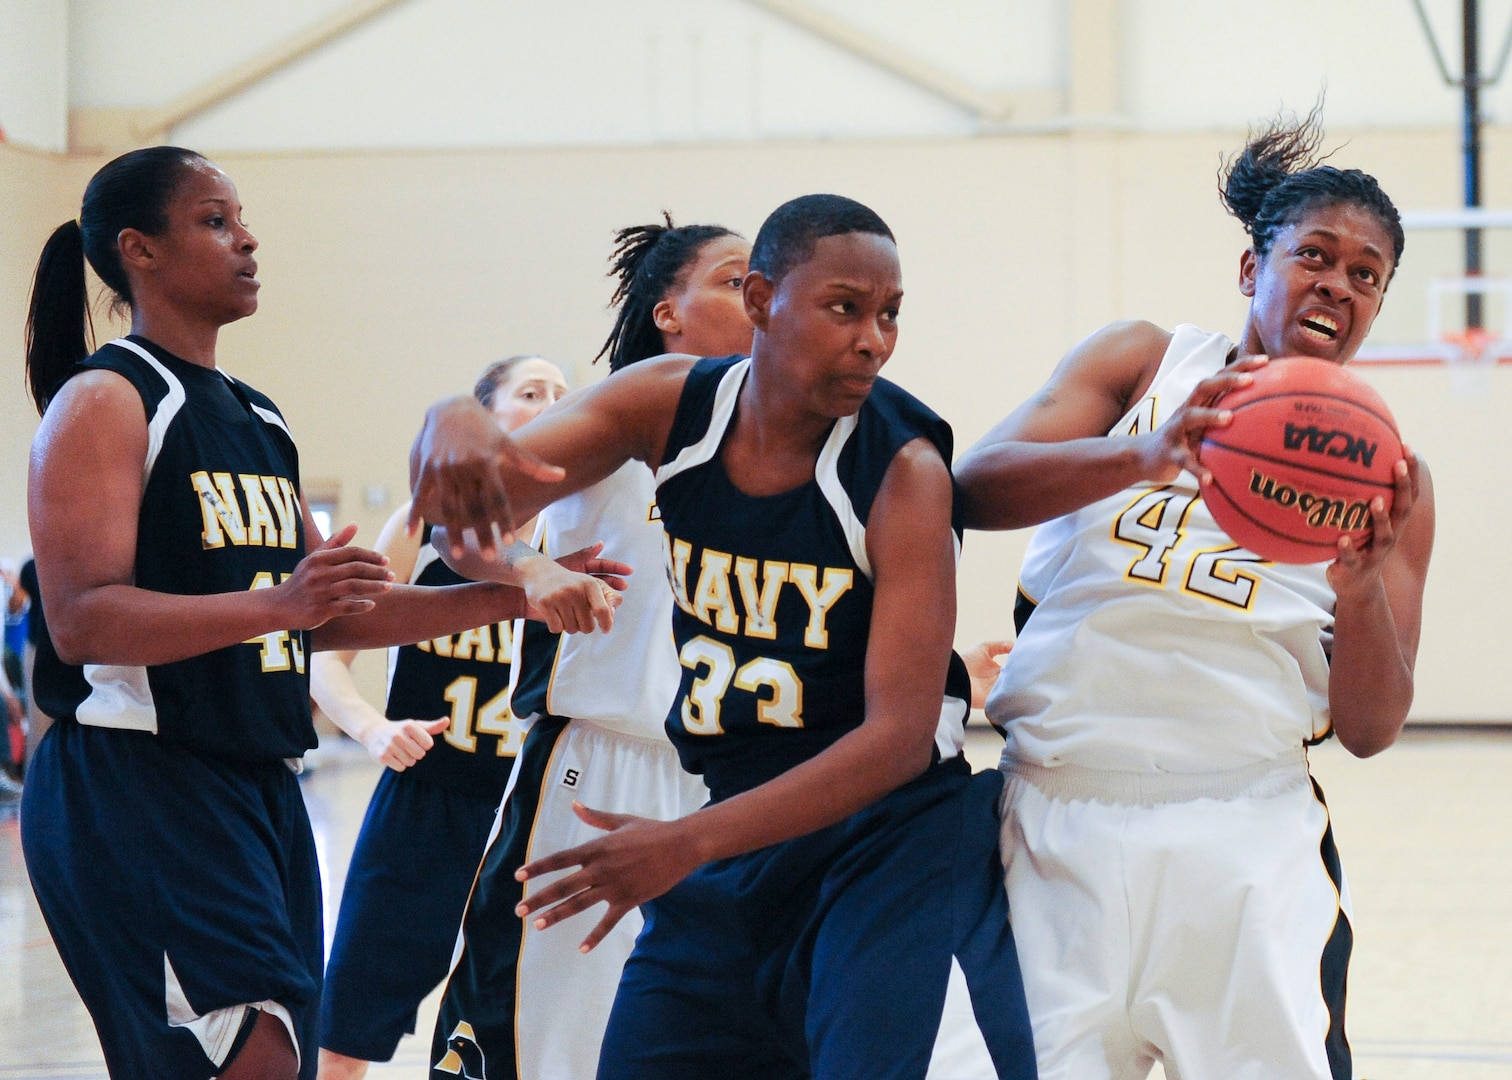 2012 Armed Forces Basketball Women's Championship